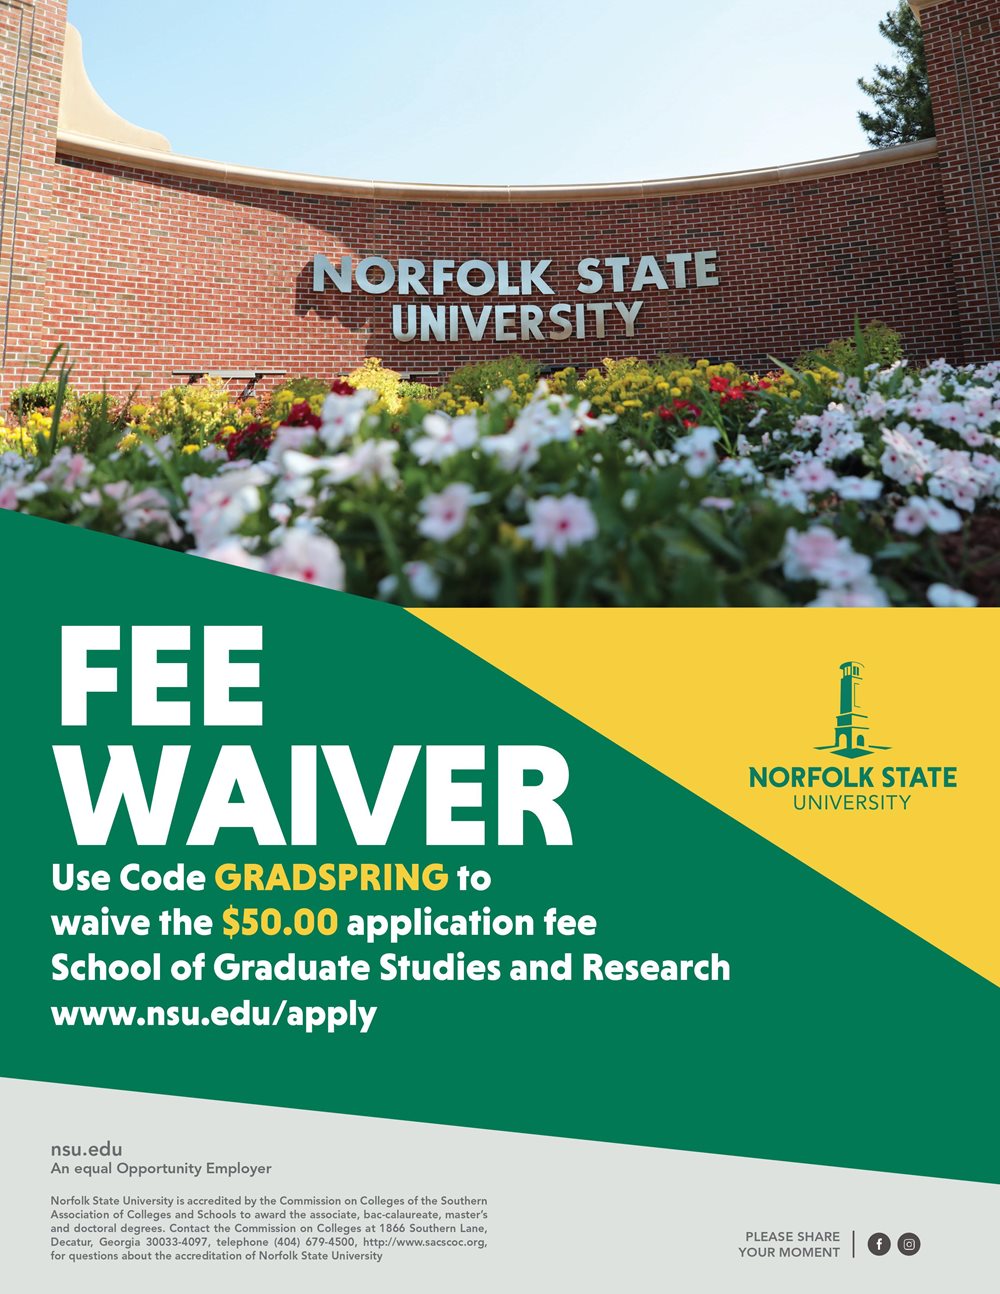 Fee Waiver:Use Code GRADSPRING to waive the $50,00 application fee School of Graduate Studies and Research www.nsu.edu/apply nsu.edu An equal Opportunity Employer Norfolk State University is accredited by the Commission on Colleges of the Southern Association of Colleges and Schools to award the associate, baccalaureate, master's and doctoral degrees. Contact the Commission on Colleges at 1866 Southern Lane, Decatur, Georgia 30033-4097, telephone (404) 679-4500, http://www.sacscoc.org, for questions about the accreditation of Norfolk State University loo PLEASE SHARE YOUR MOMENT